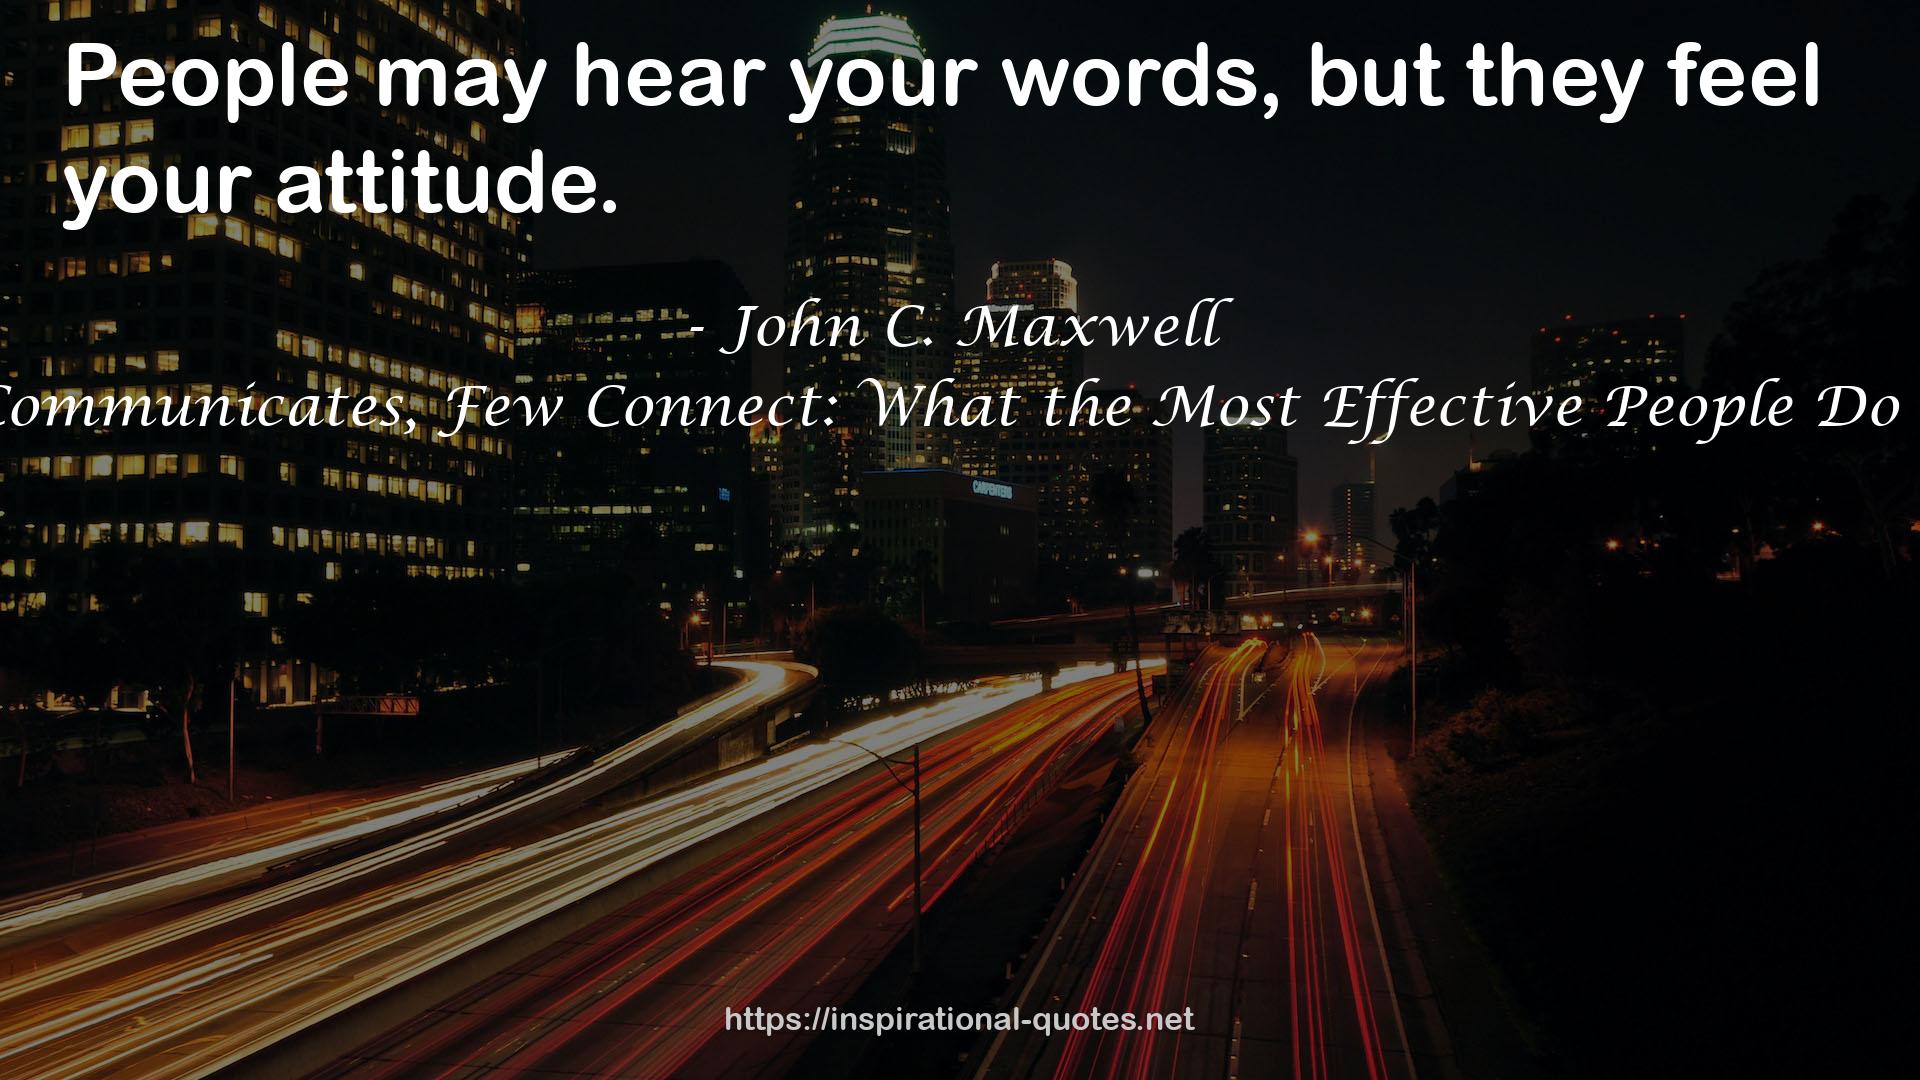 Everyone Communicates, Few Connect: What the Most Effective People Do Differently QUOTES